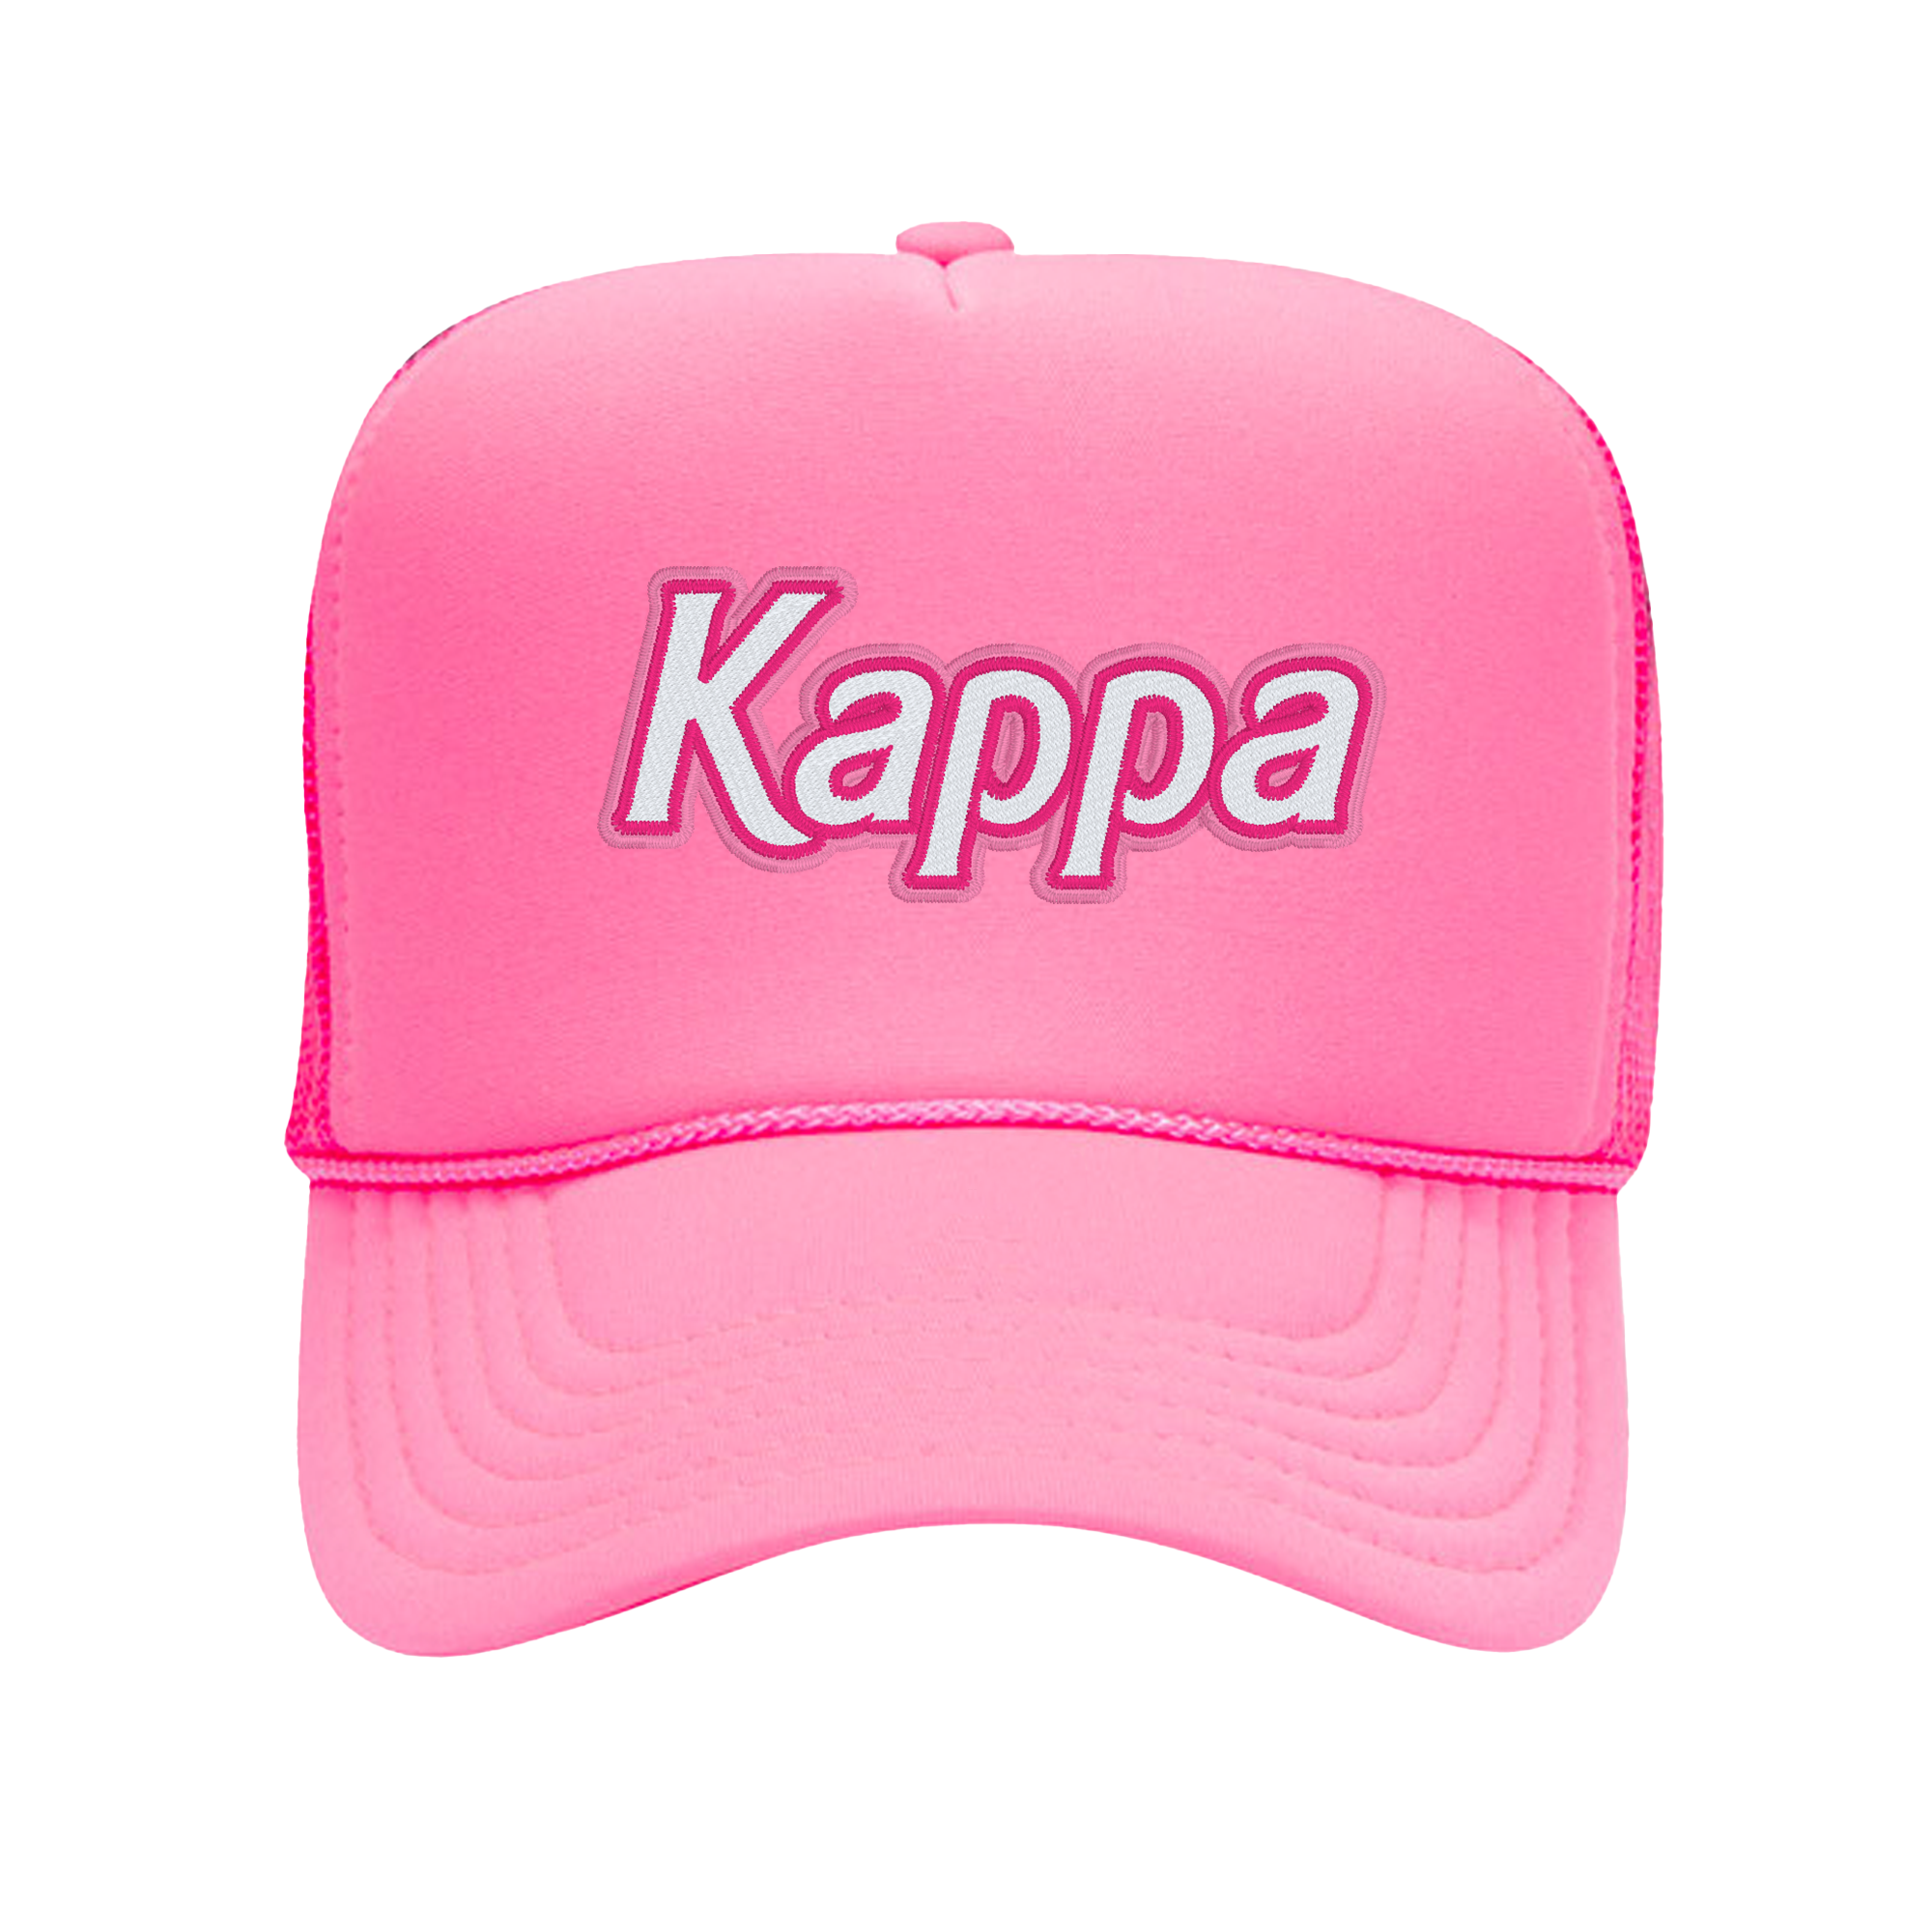 a pink cap with the word kappa printed on it